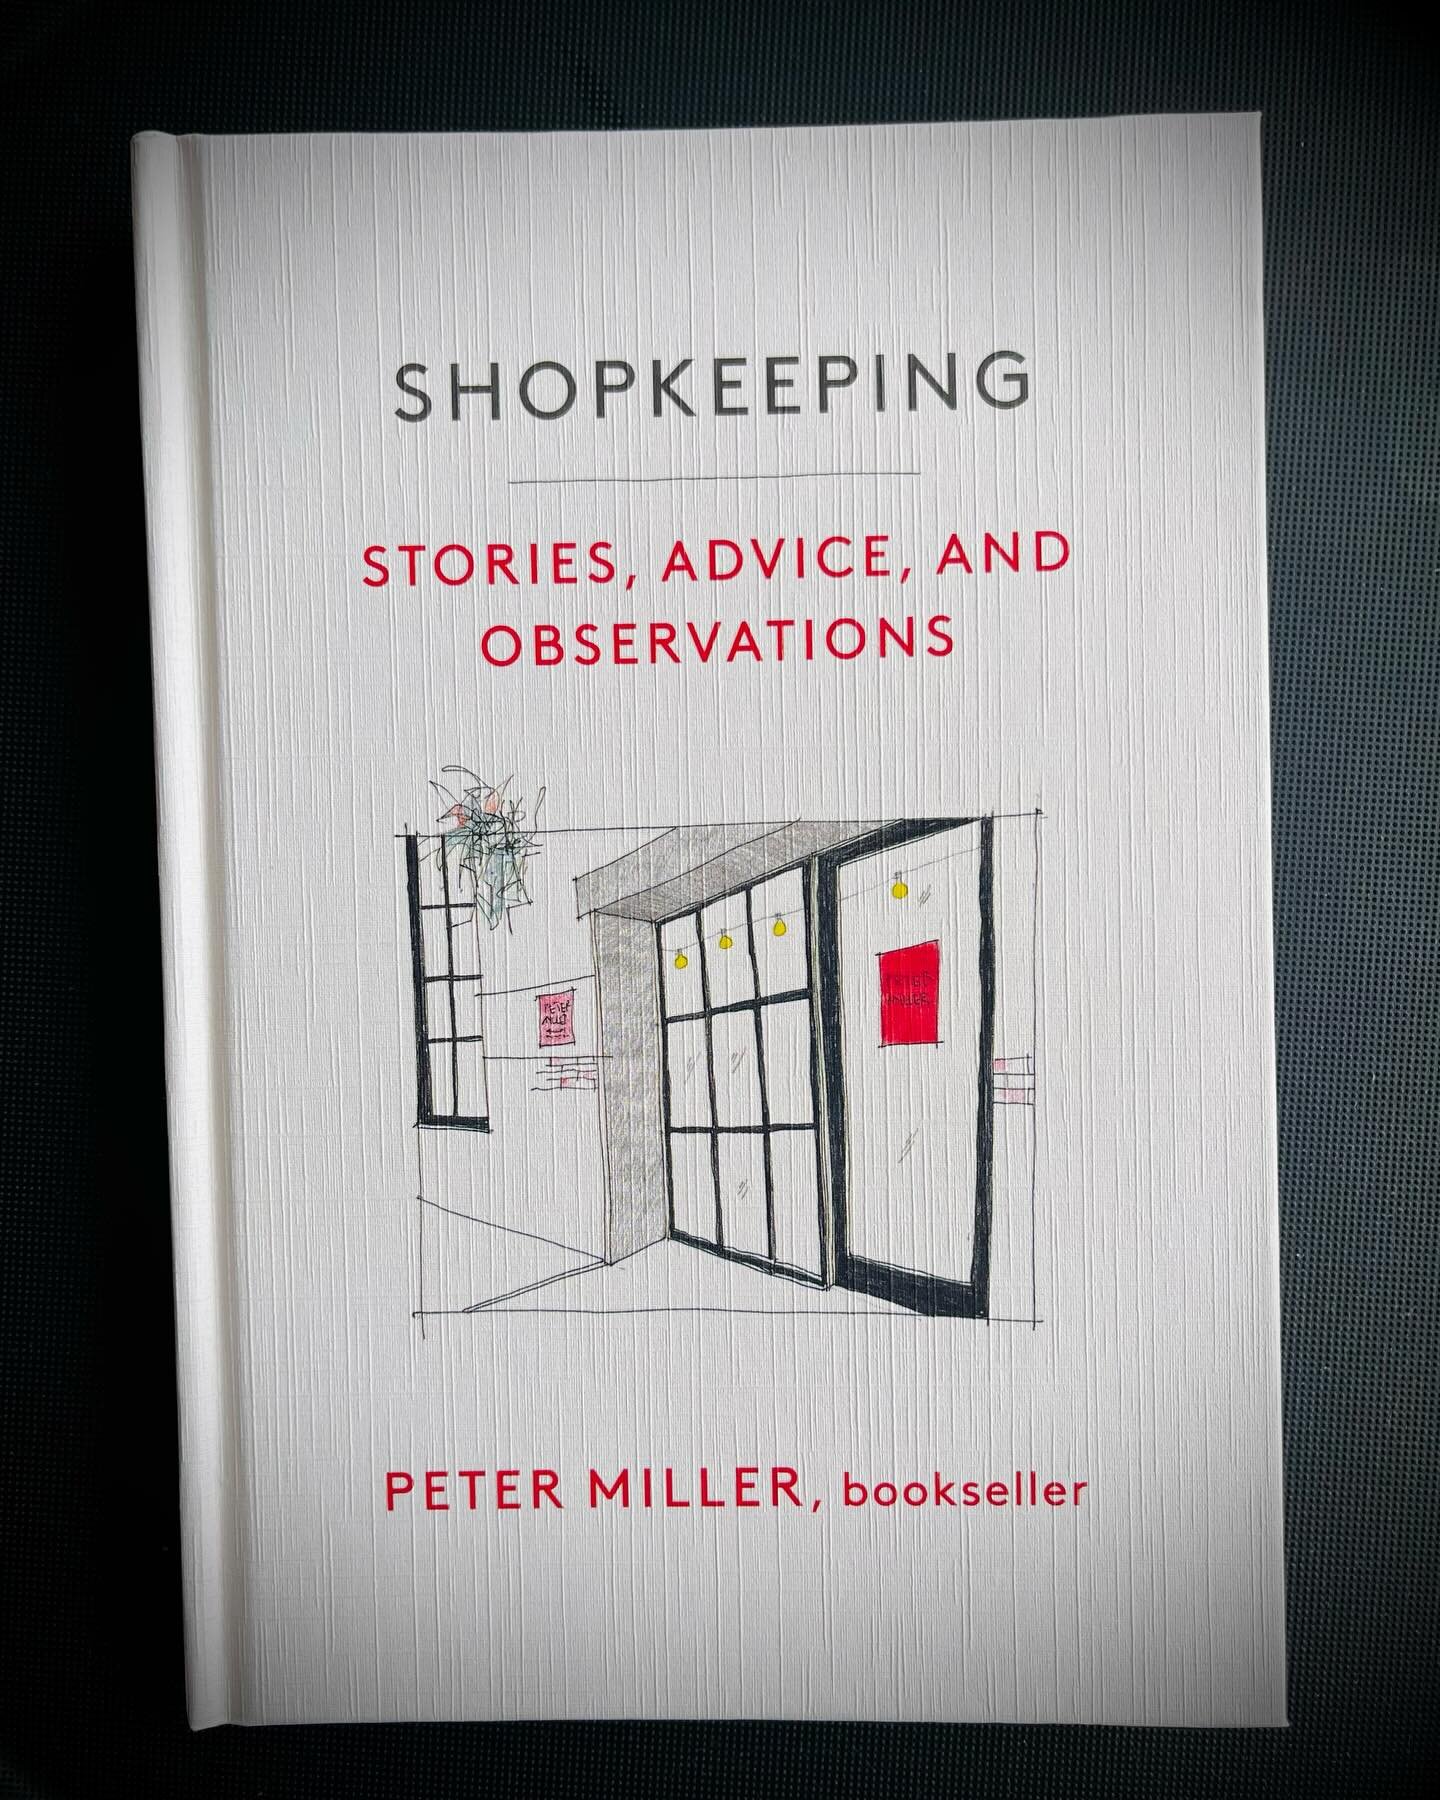 Look what arrived in the mail today! &ldquo;Shopkeeping&rdquo; by the wonderful @petermillerbooks&mdash;which, of course, is about much more than keeping shop. Run, don&rsquo;t walk to your nearest bookstore or order from Peter himself at petermiller